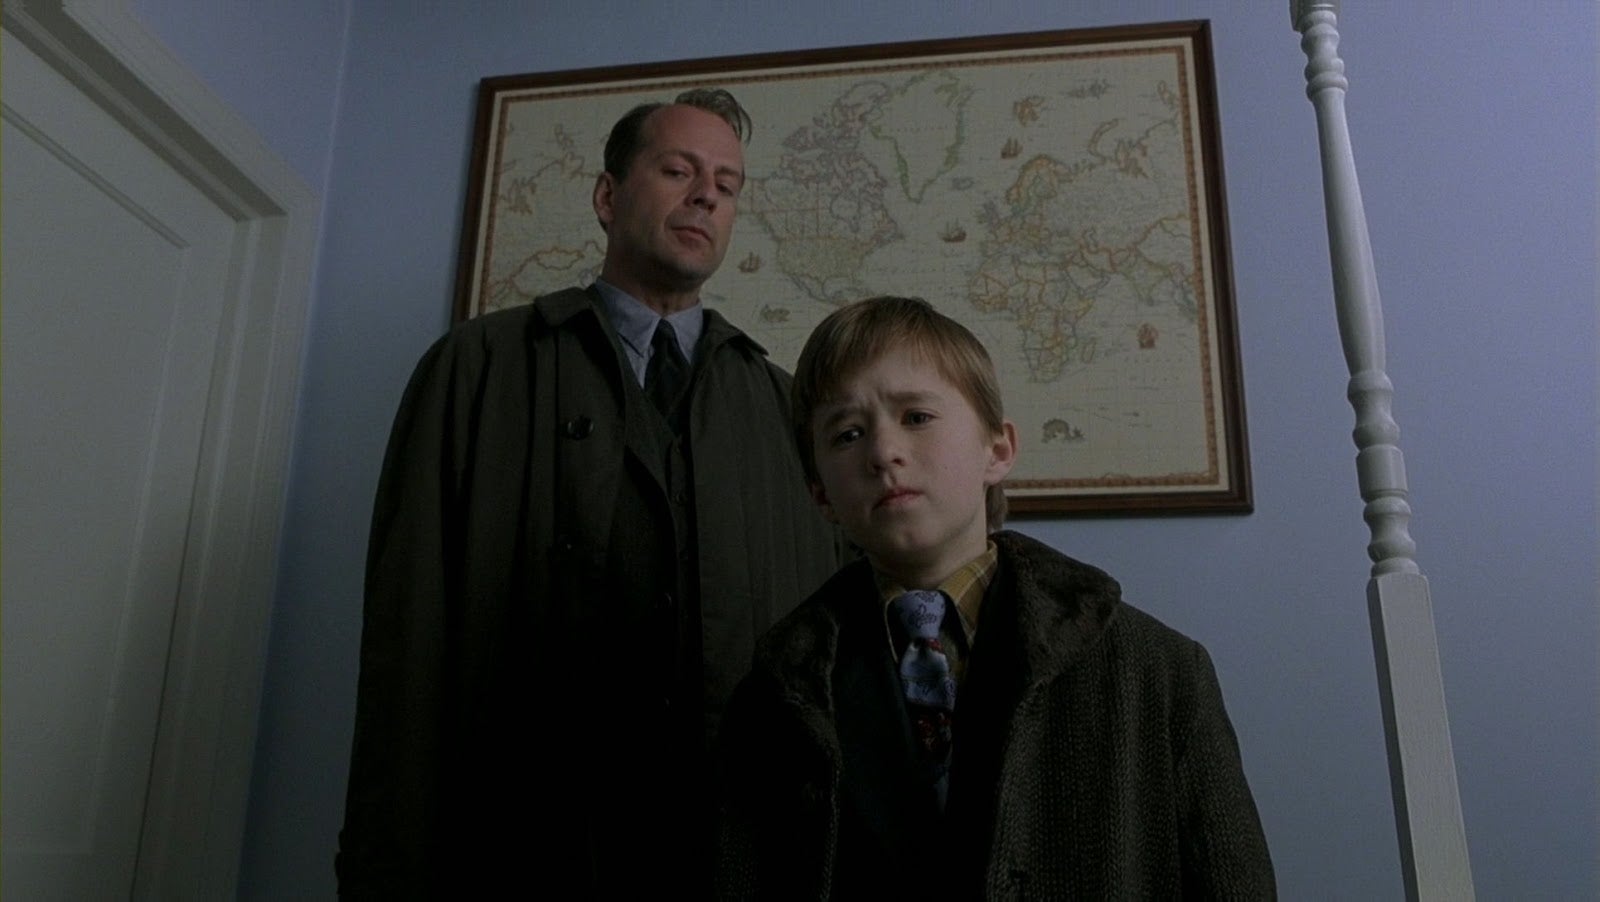 Bruce Willis and Haley Joel Osment in The Sixth Sense. (Photo: Hollywood Pictures)